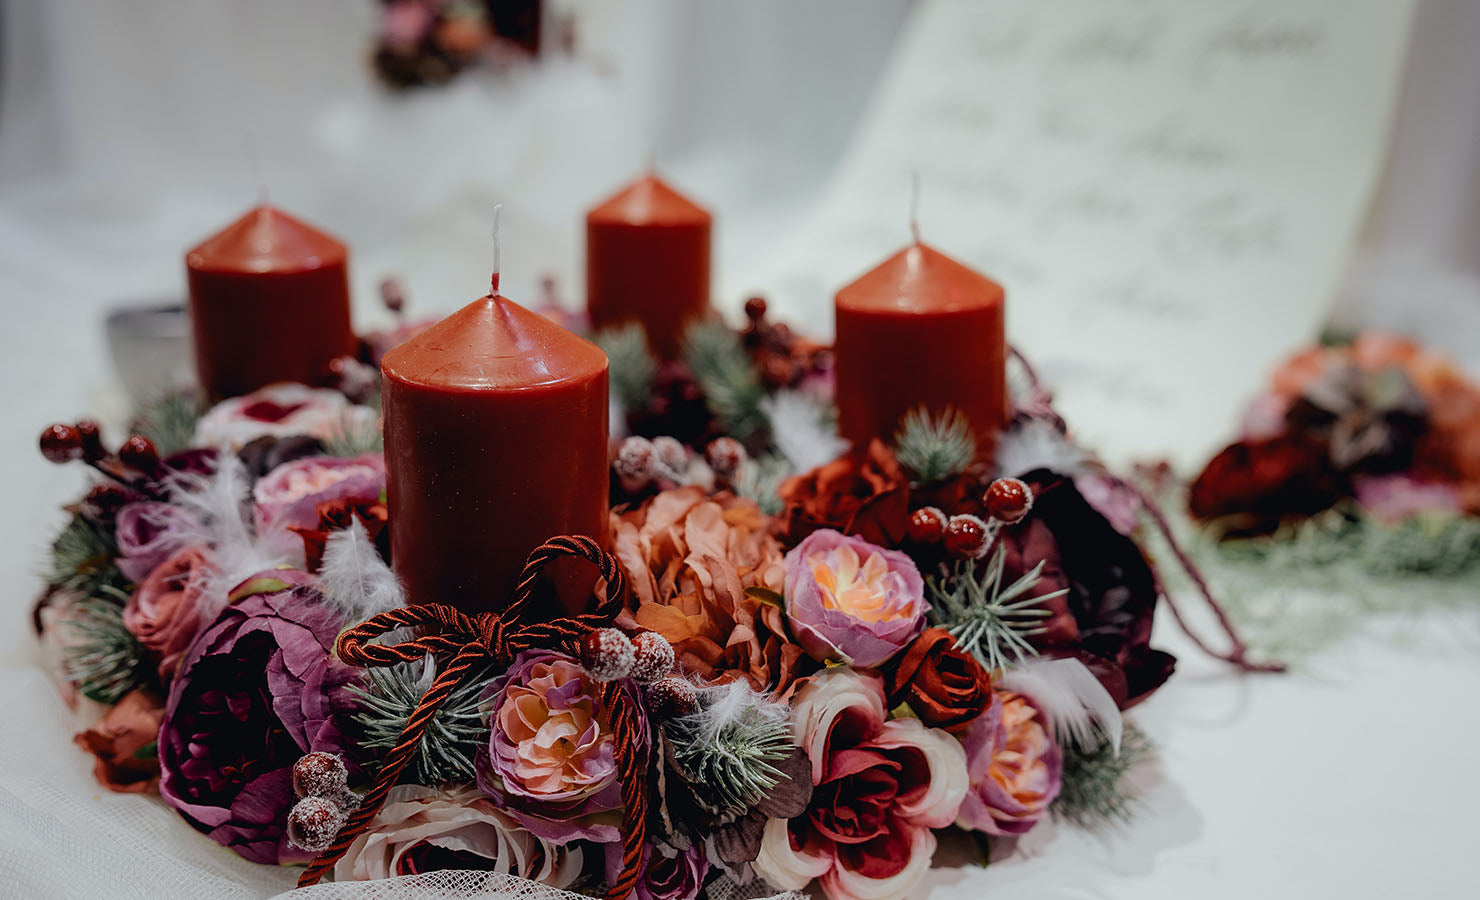 bloomthis-blog-fun-easy-christmas-decoration-ideas-08-table-red-candles-wreath-flowers